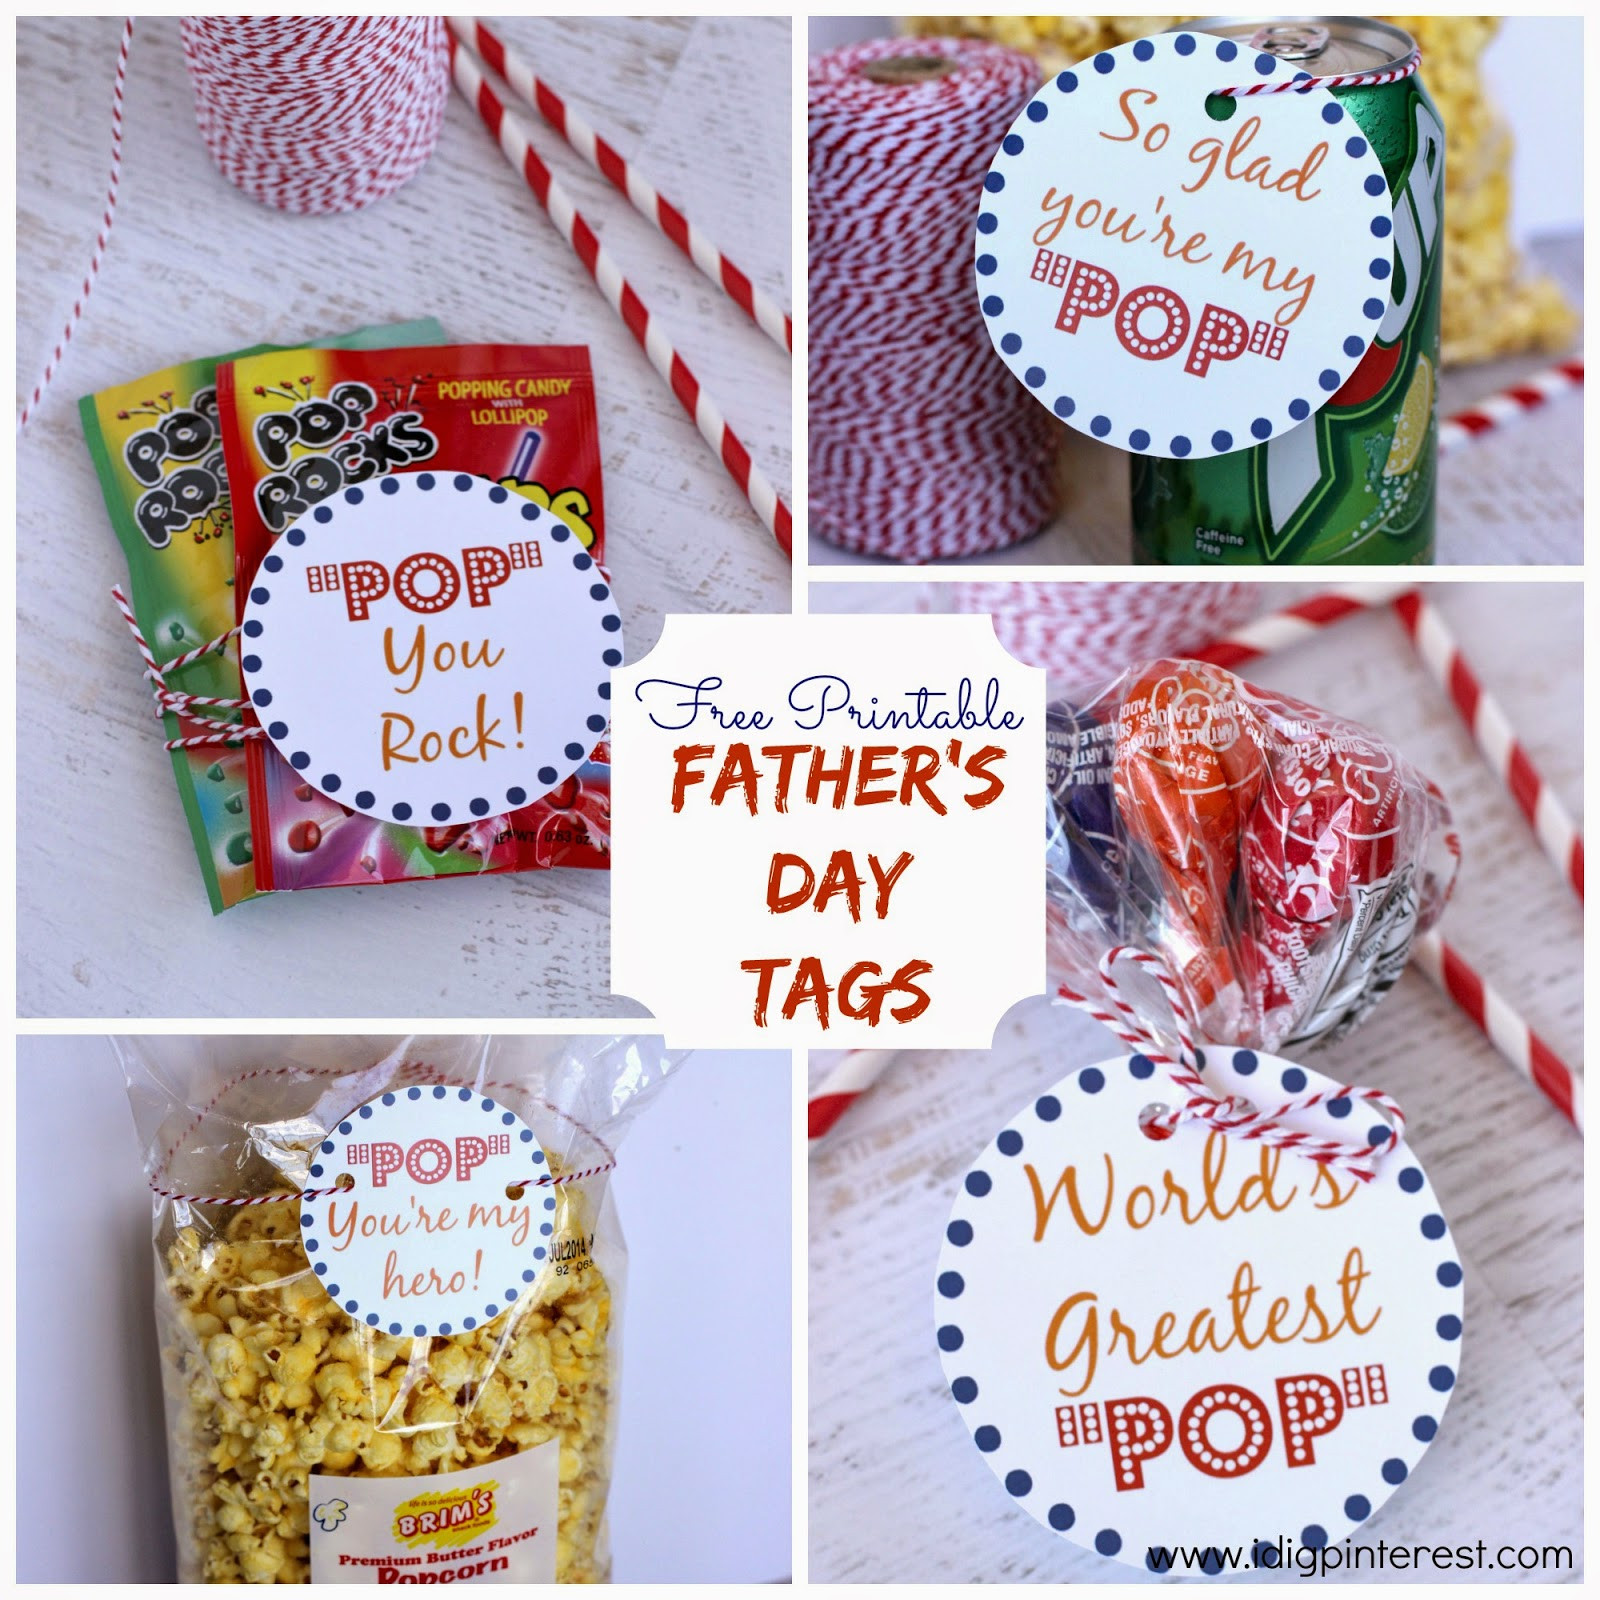 Pinterest Fathers Day Ideas
 Father s Day "POP" Free Printables I Dig Pinterest